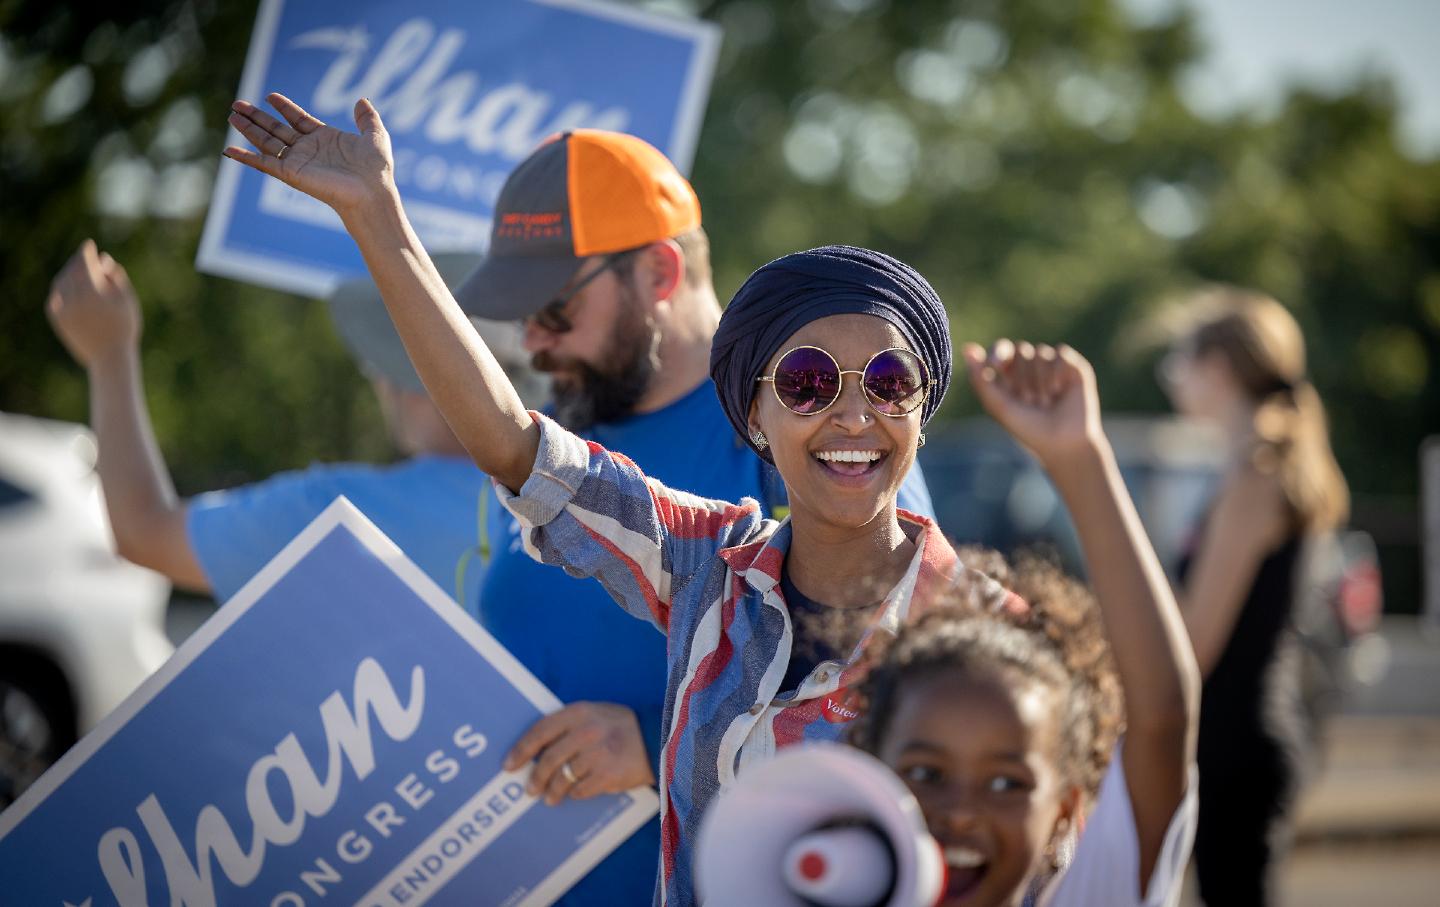 Rep. Ilhan Omar waves to passersby during a voter engagement event in Minneapolis.